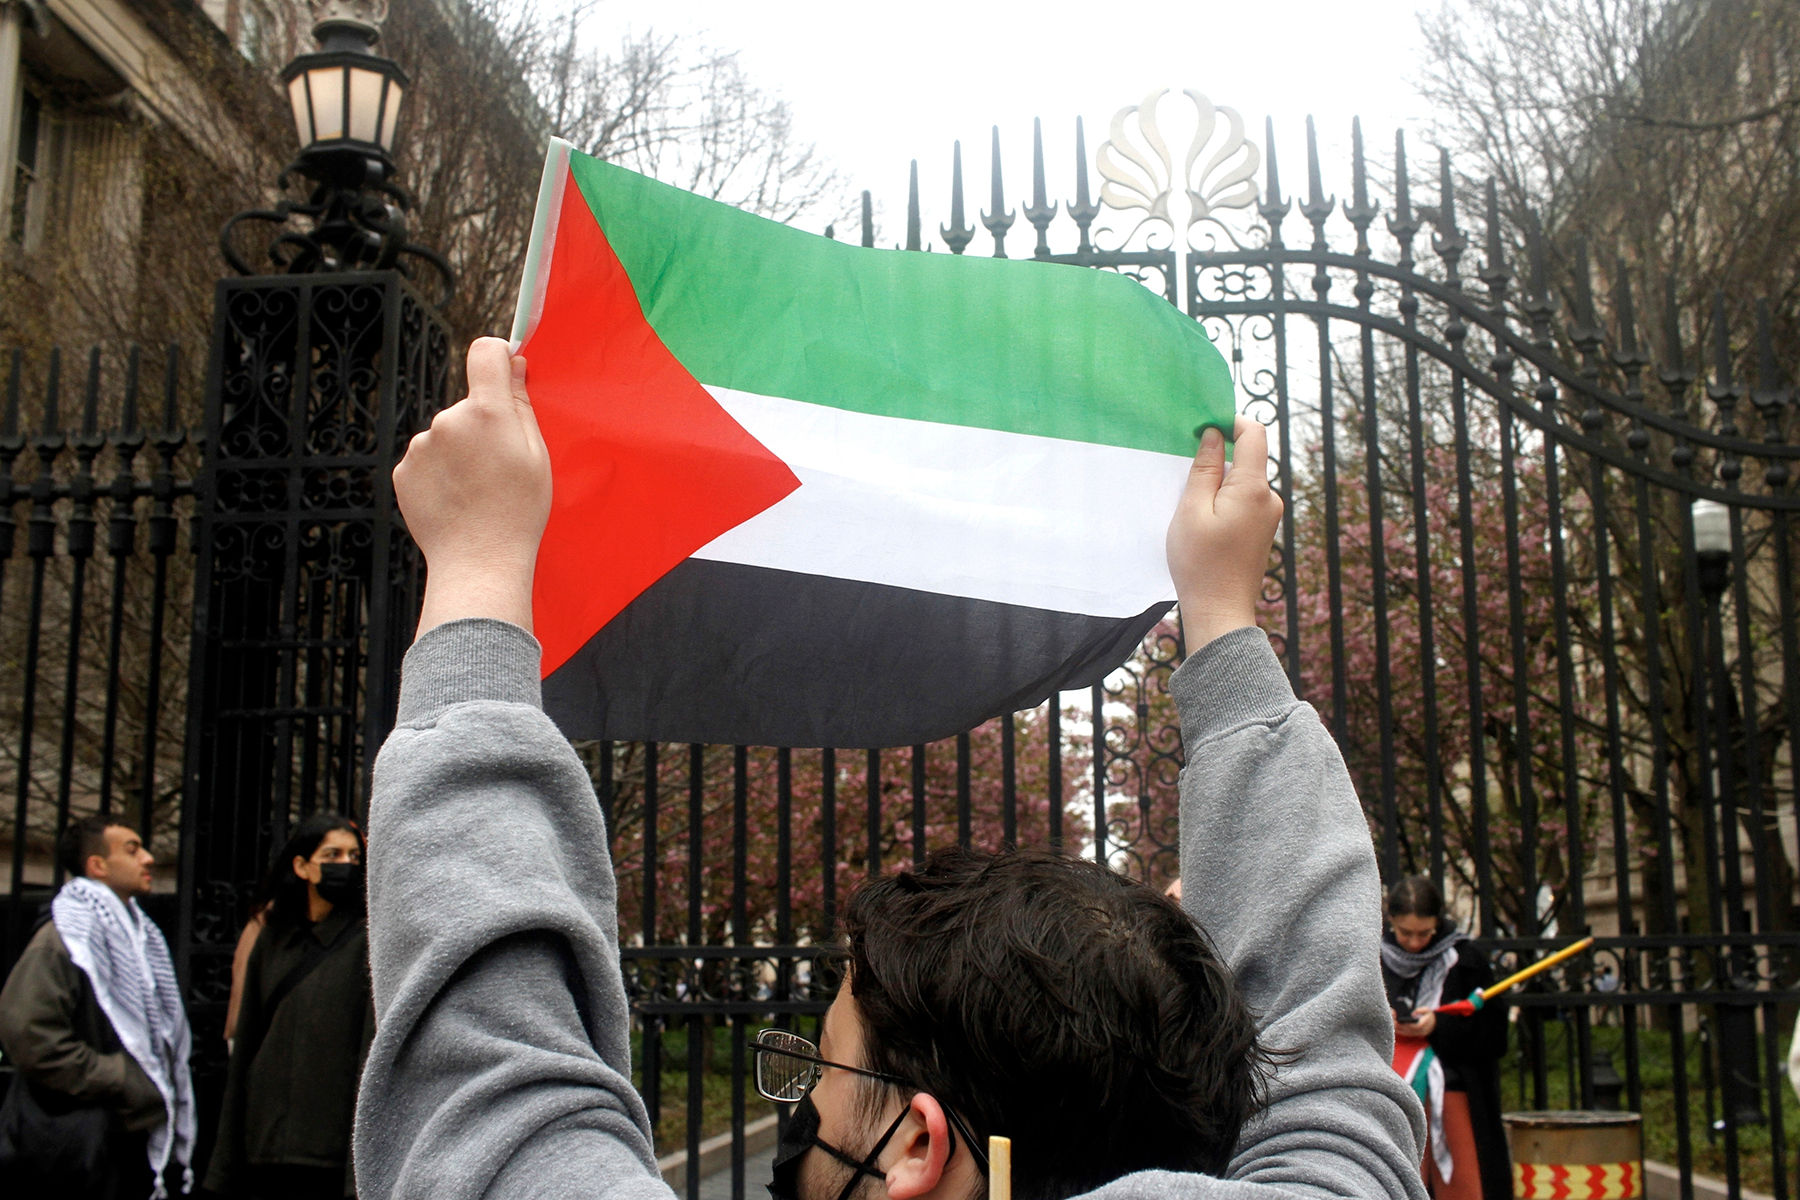 Columbia Cracks Down on Pro-Palestine Protest After Congressional Hearing